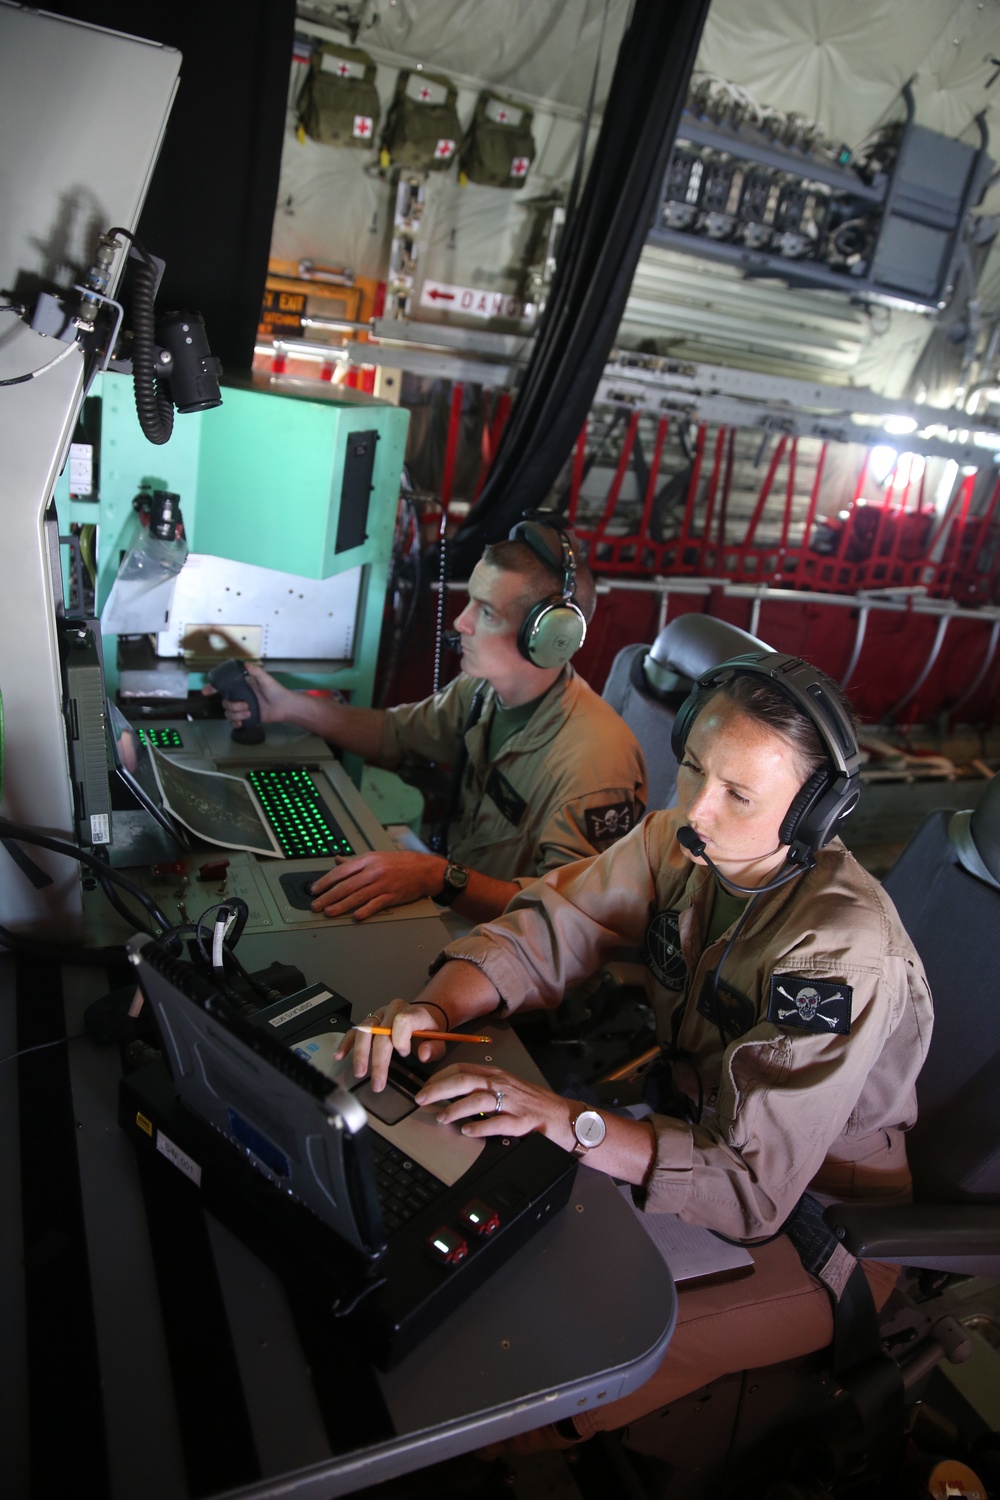 VMGR-352 conducts simulated close air support exercise